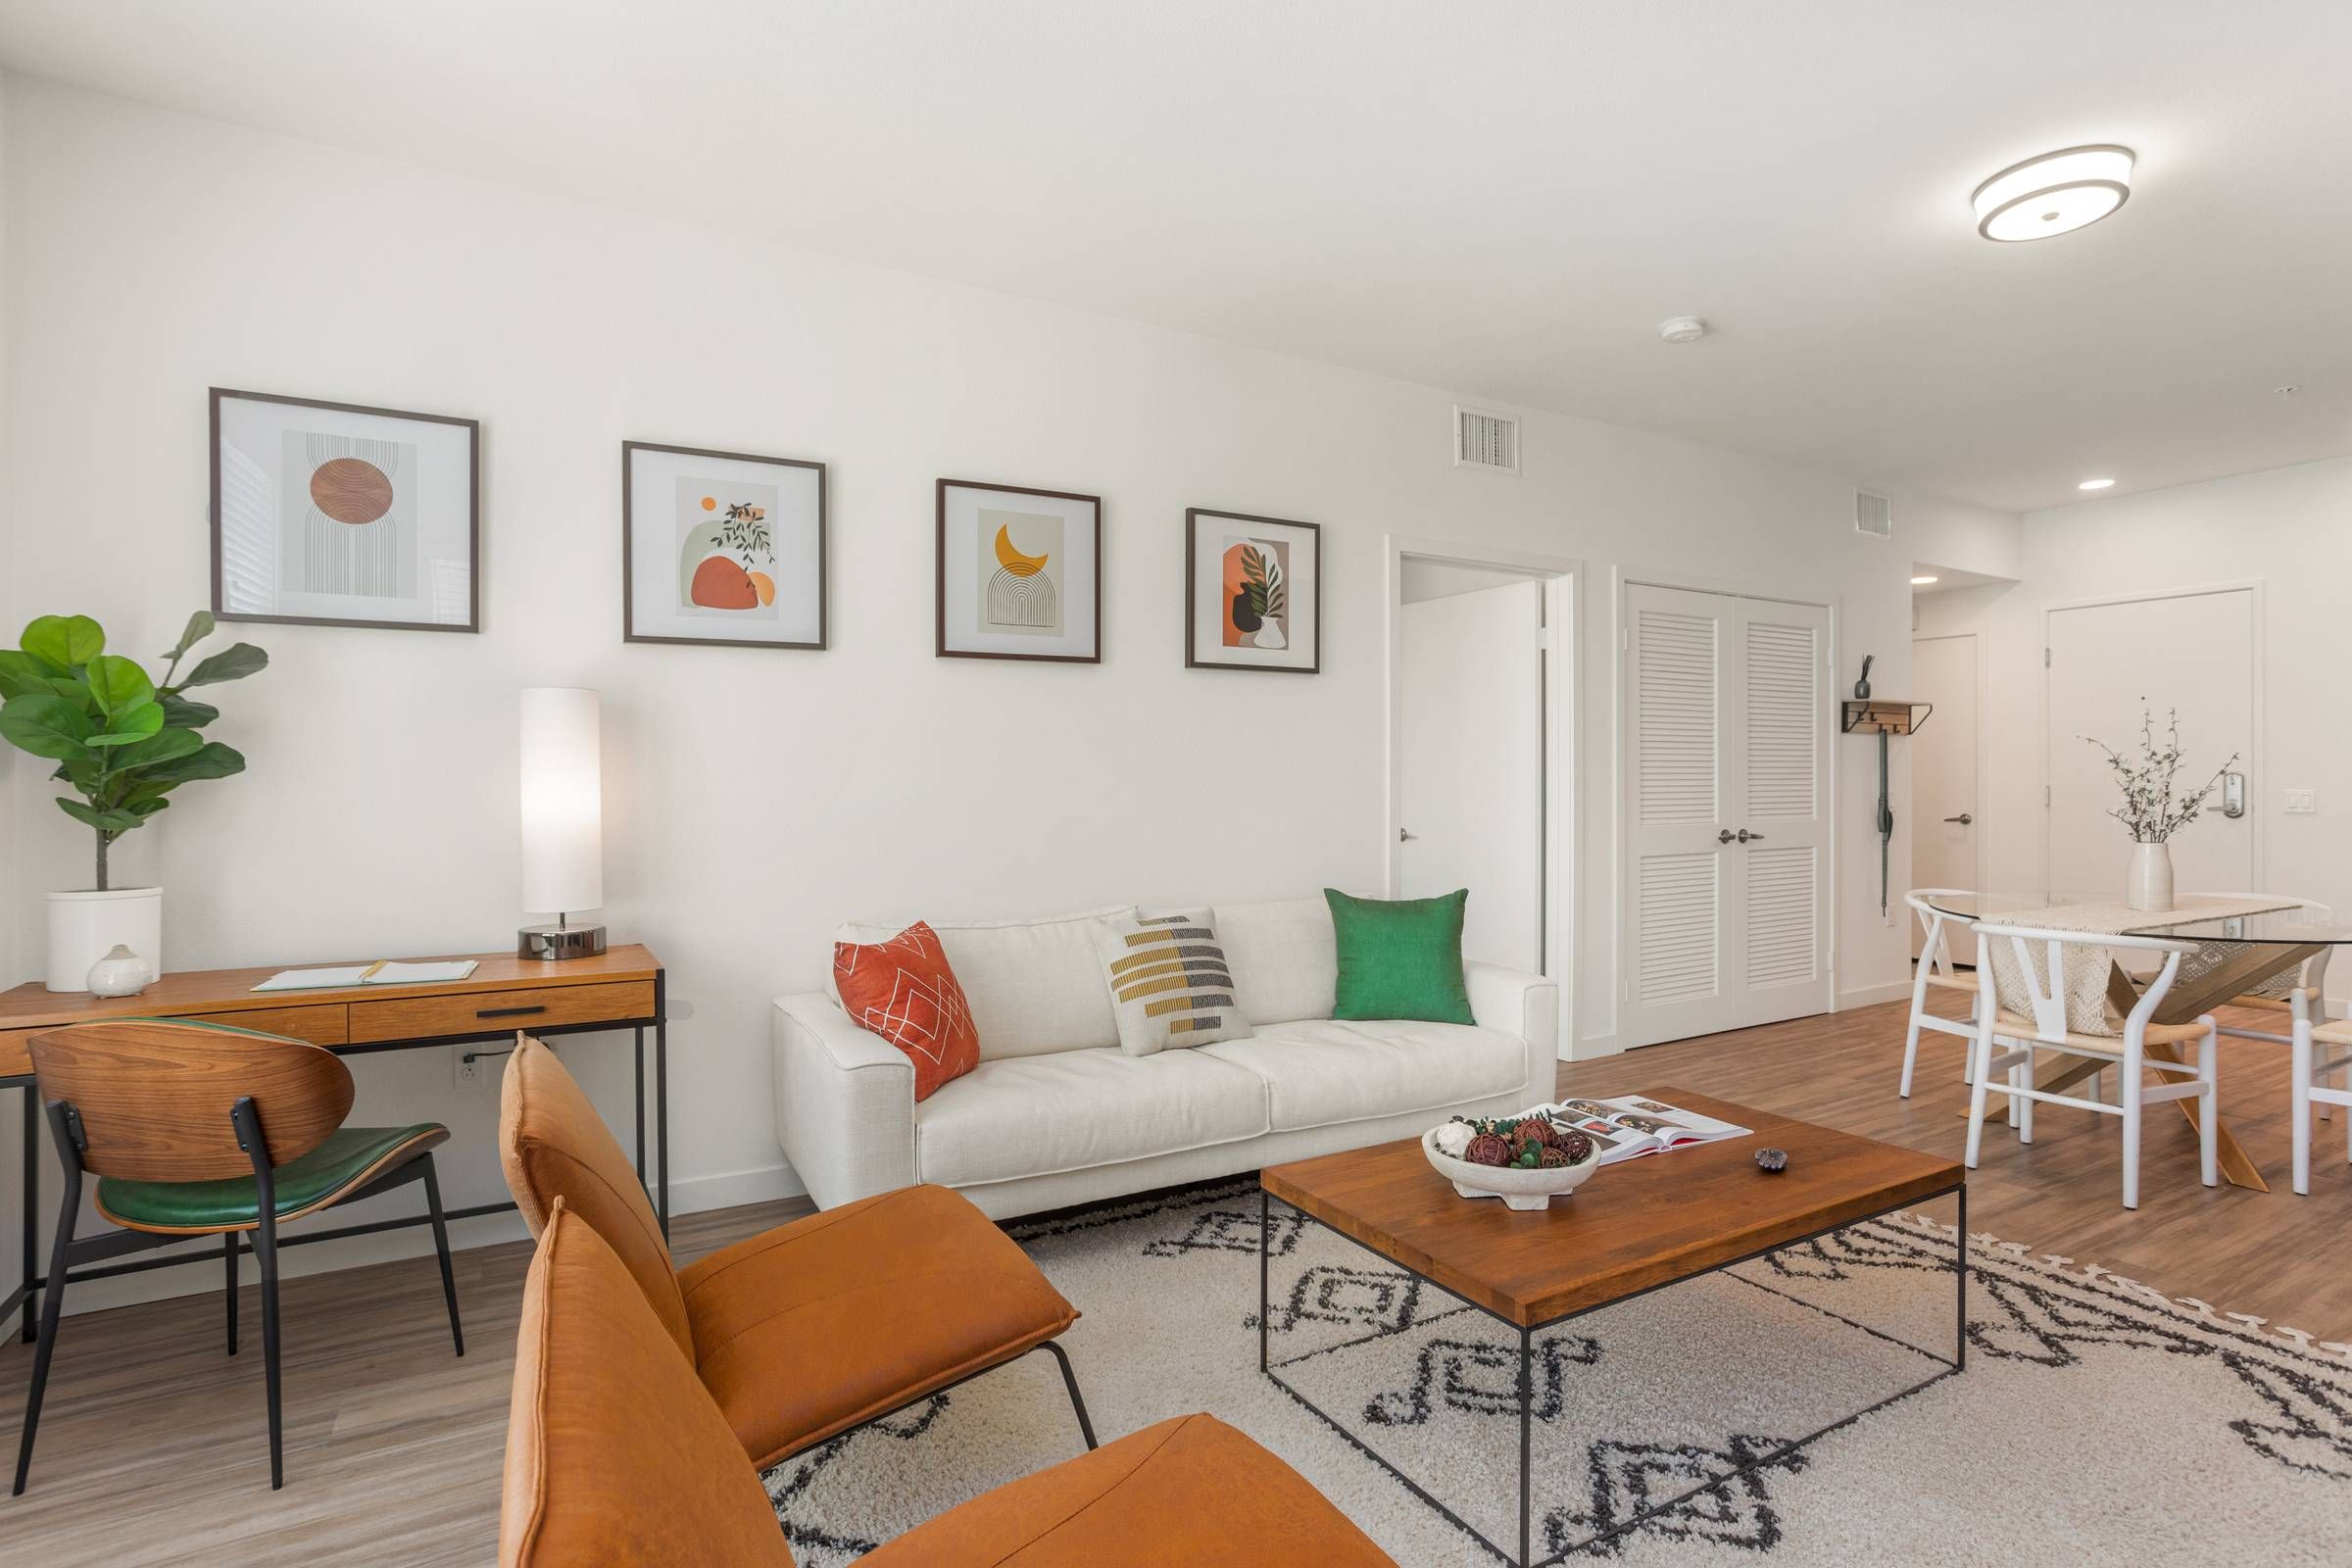 Alta Upland presents a bright living room adorned with colorful wall art above a minimalistic desk, a green potted plant, and mid-century modern furnishings.